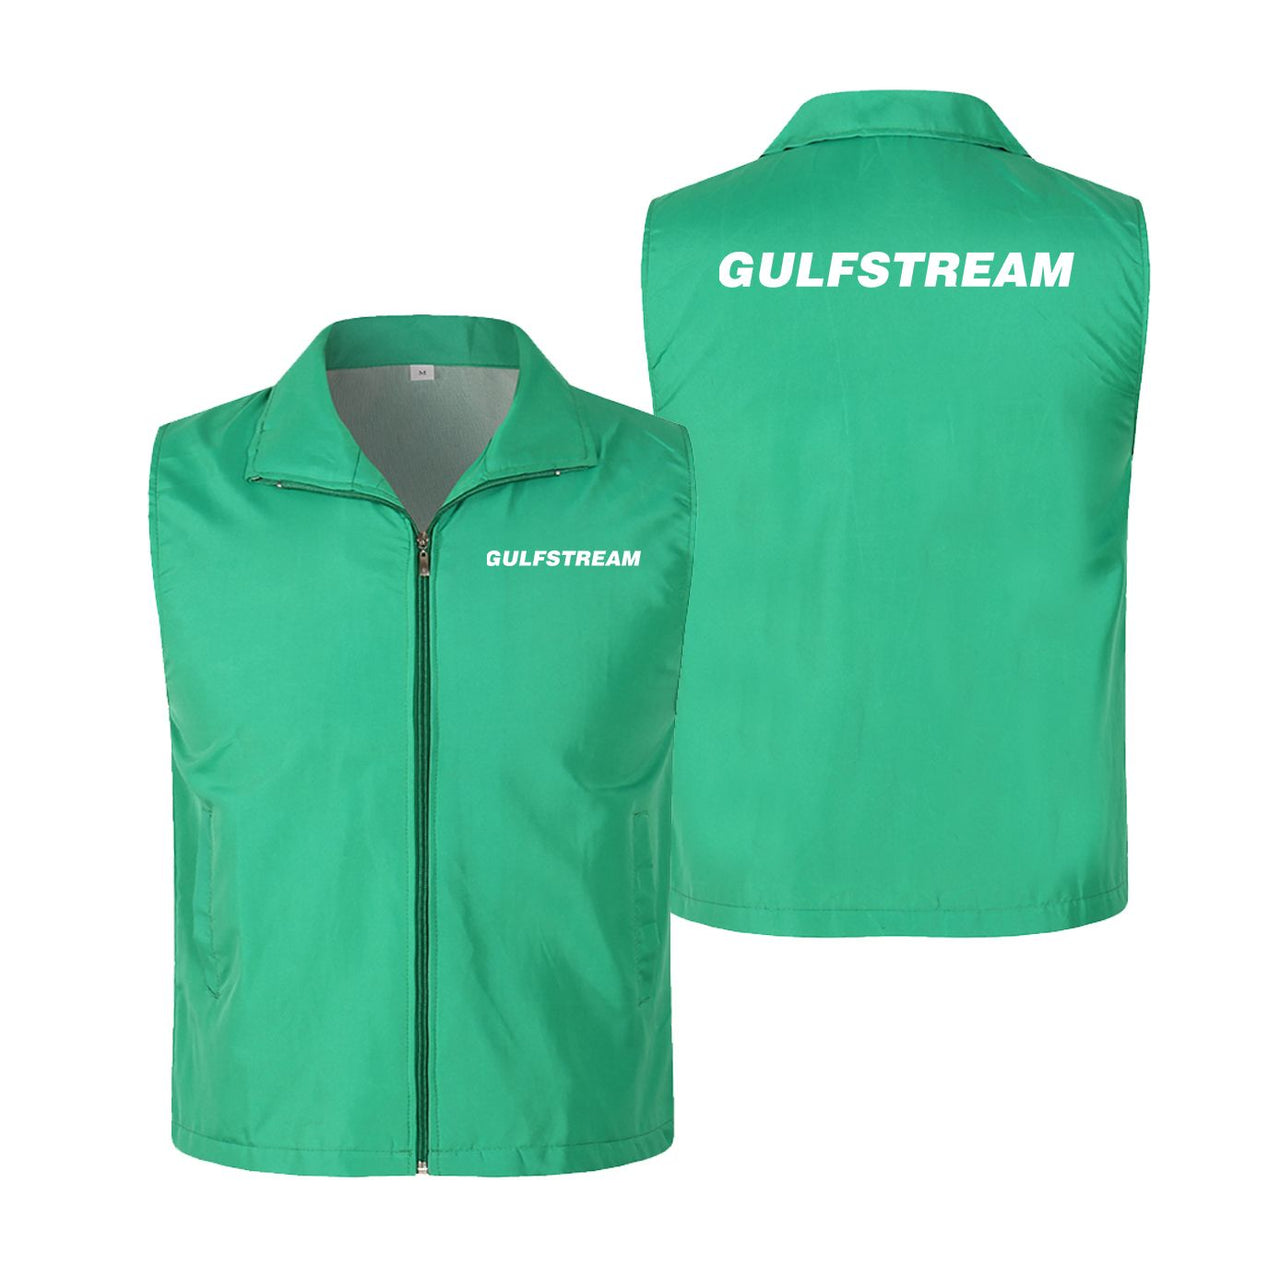 Gulfstream & Text Designed Thin Style Vests